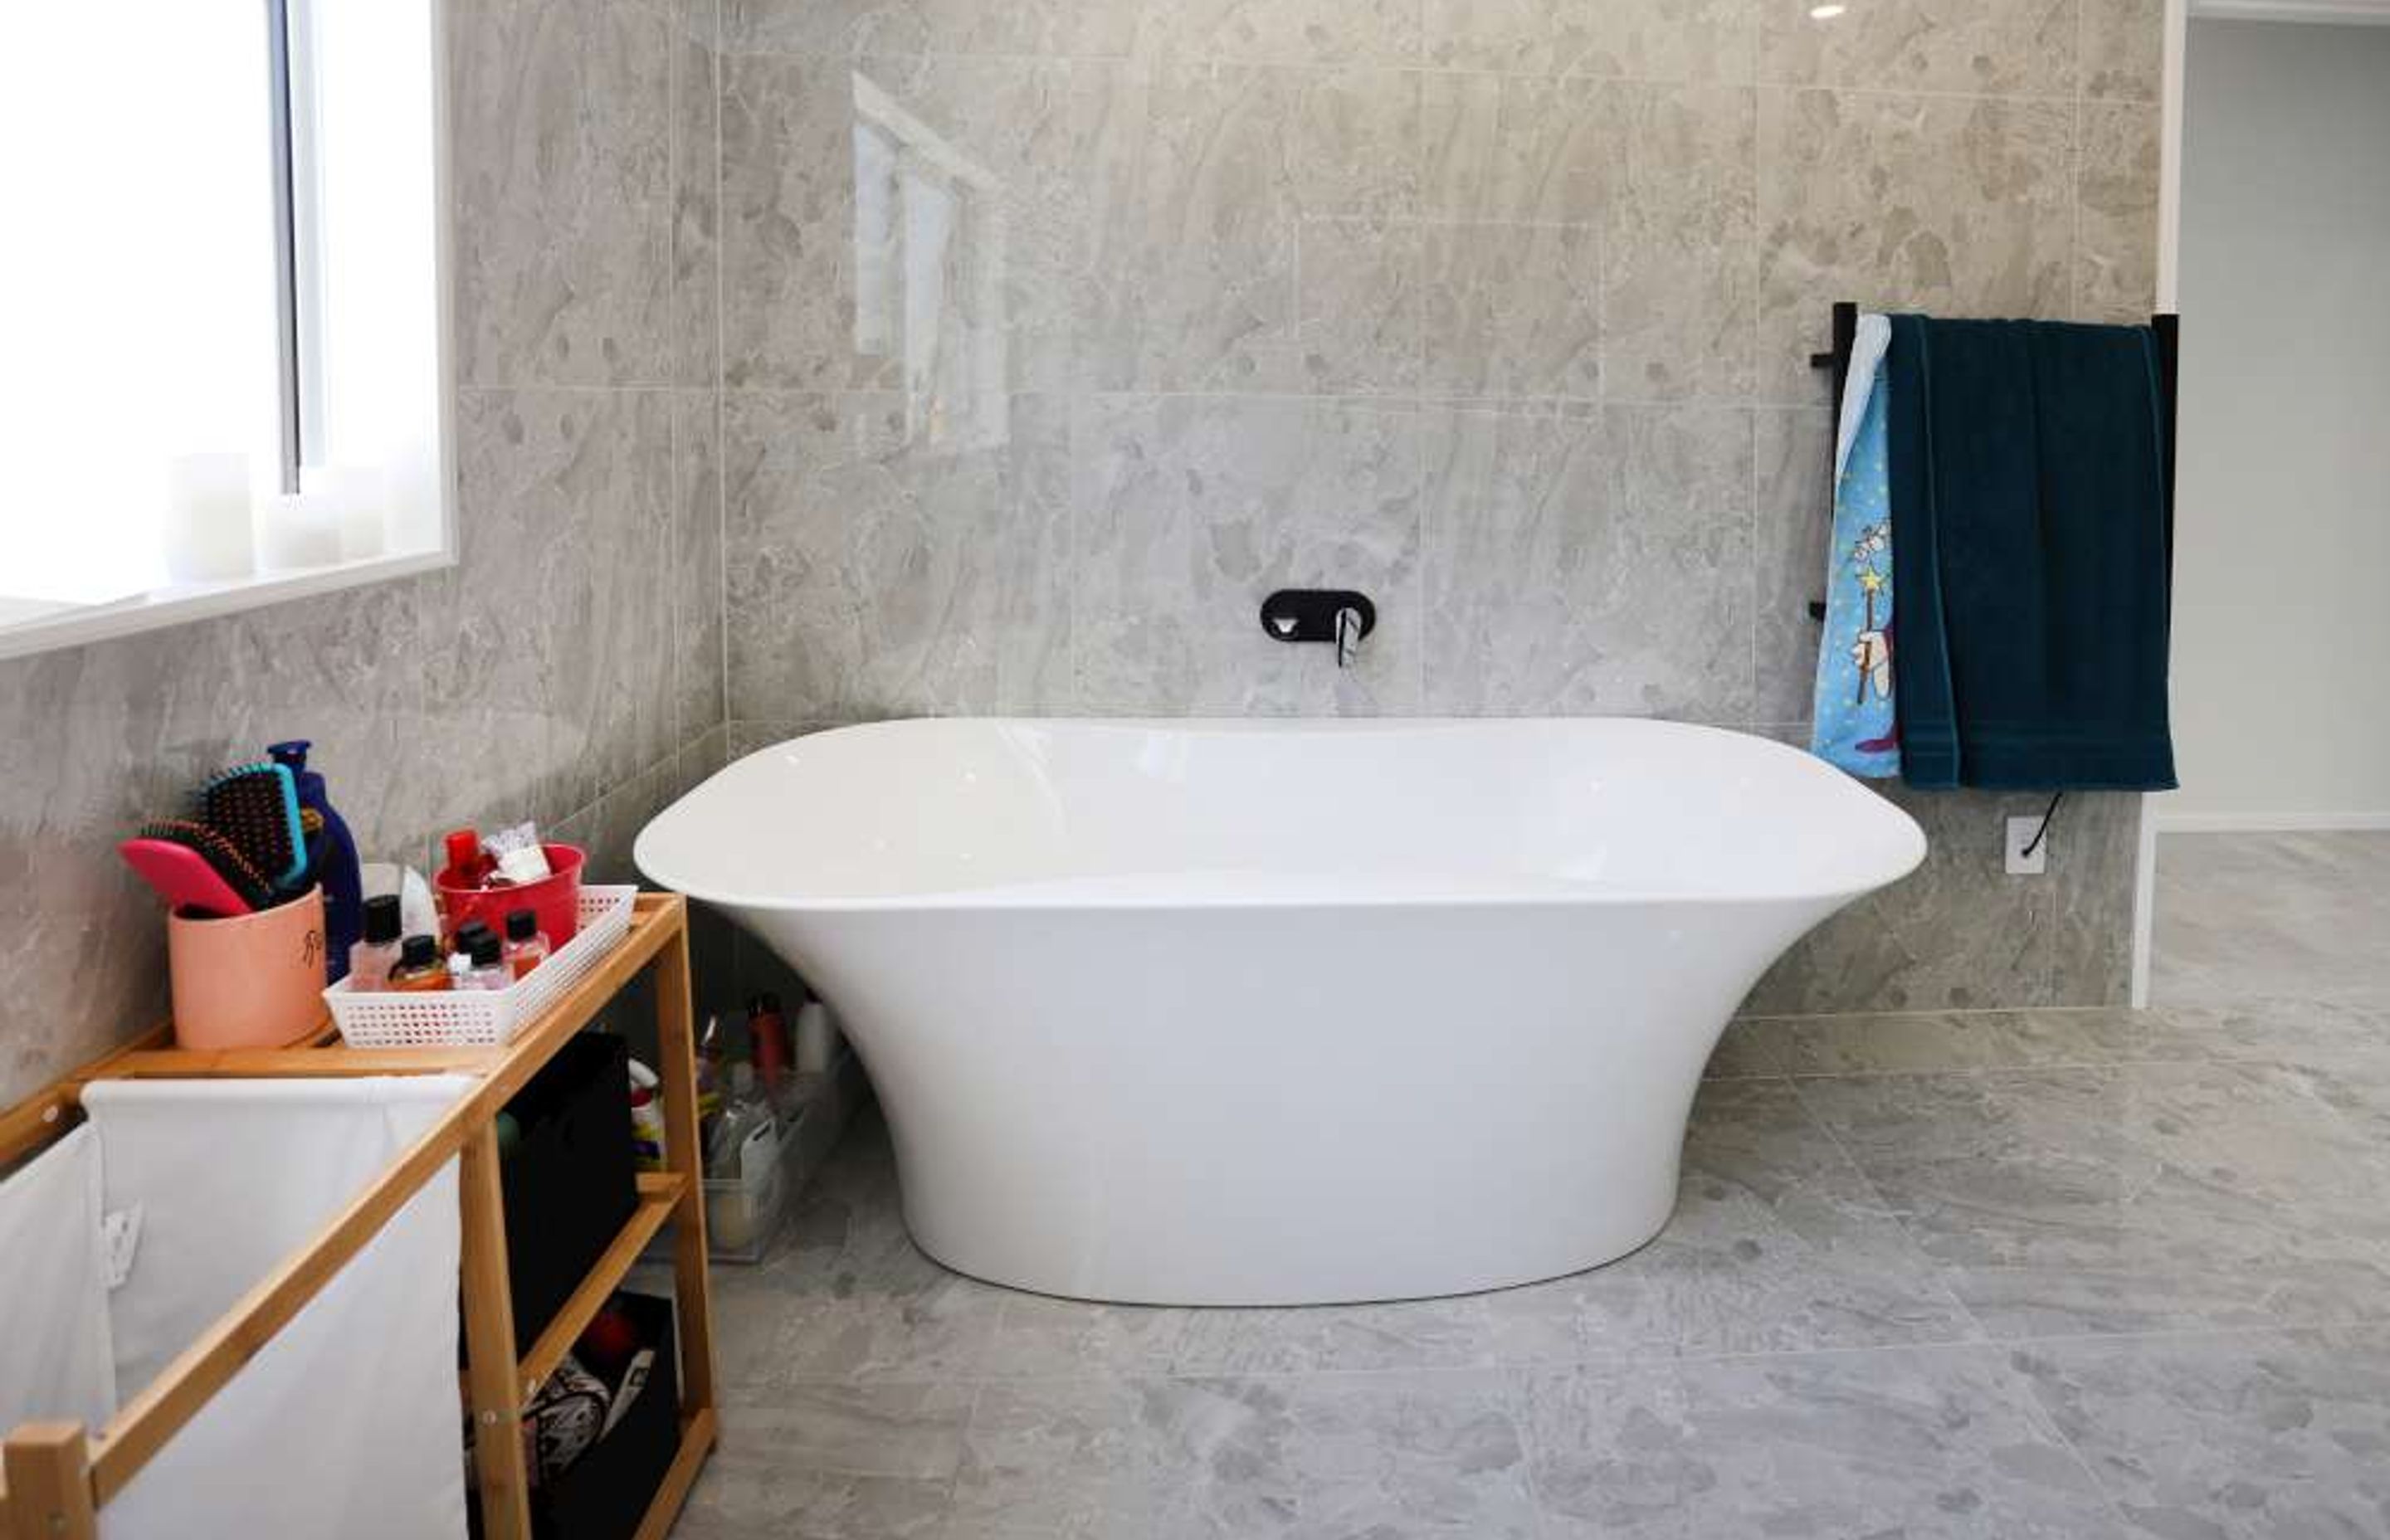 BATHROOM RENOVATION PHOTOS FOR OUR TOP 10 RENOVATIONS IN AUCKLAND